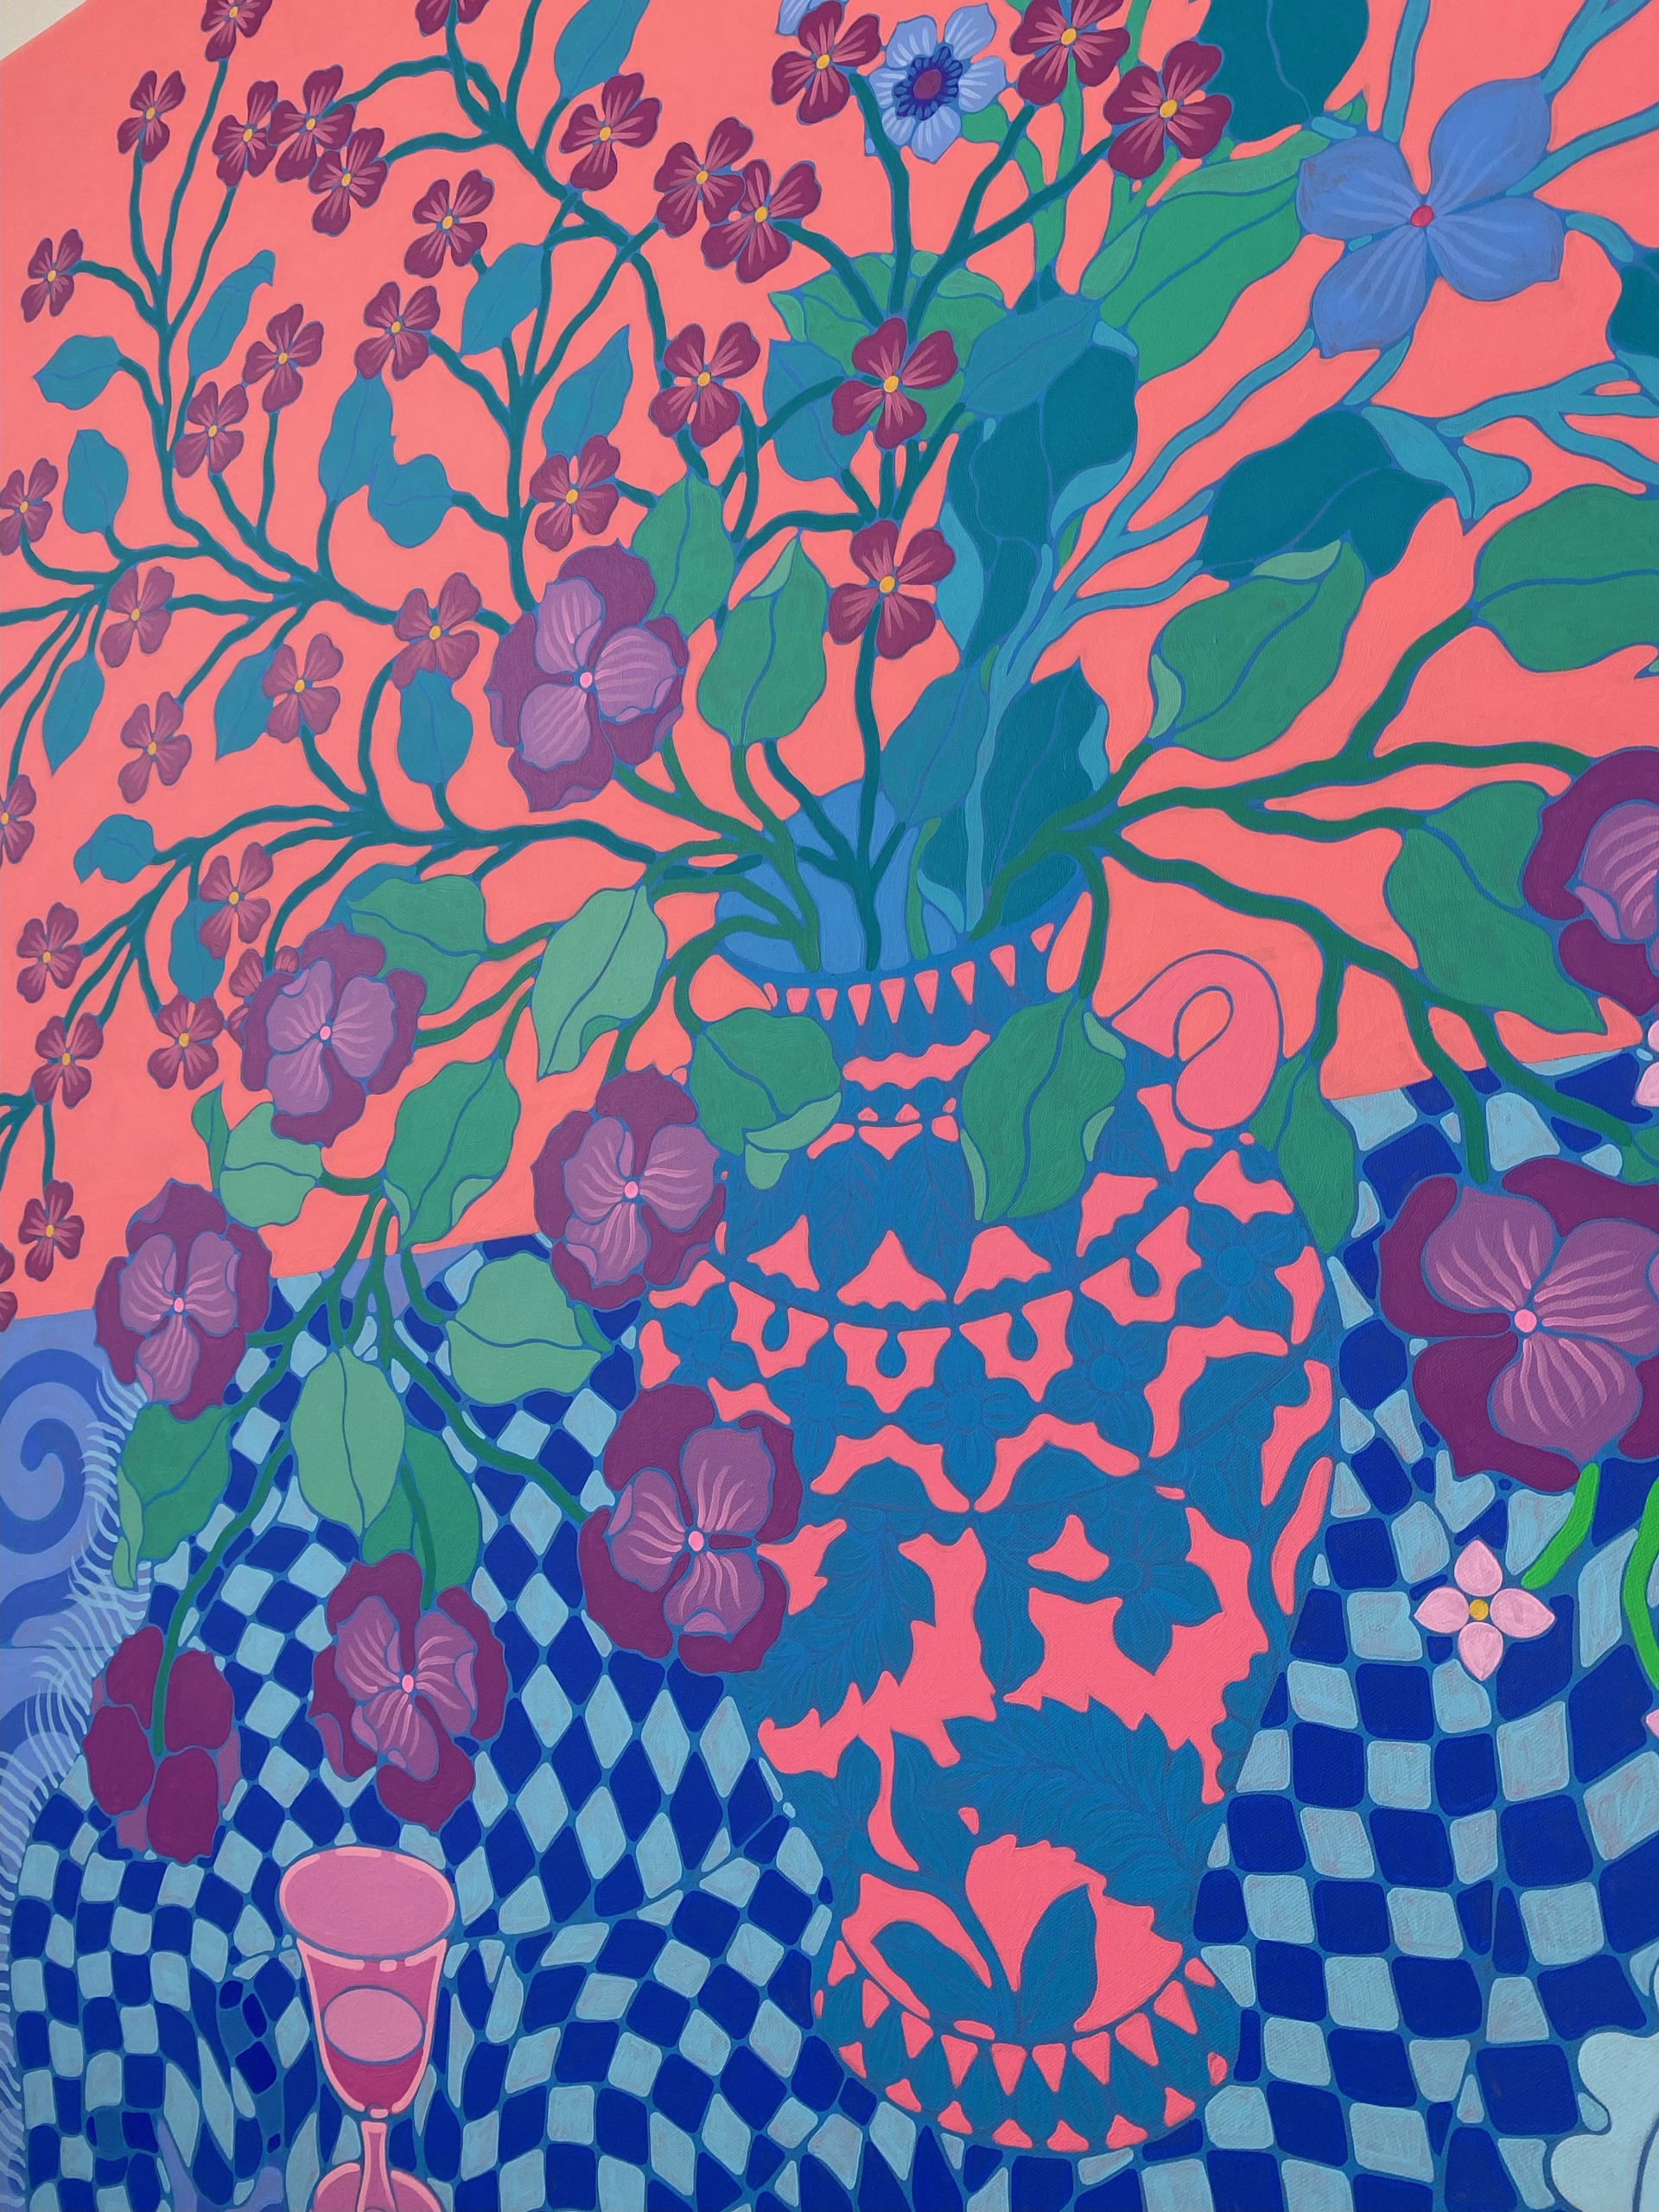 Too Many Peaches with Swirl Tiles by Sarah Ingraham